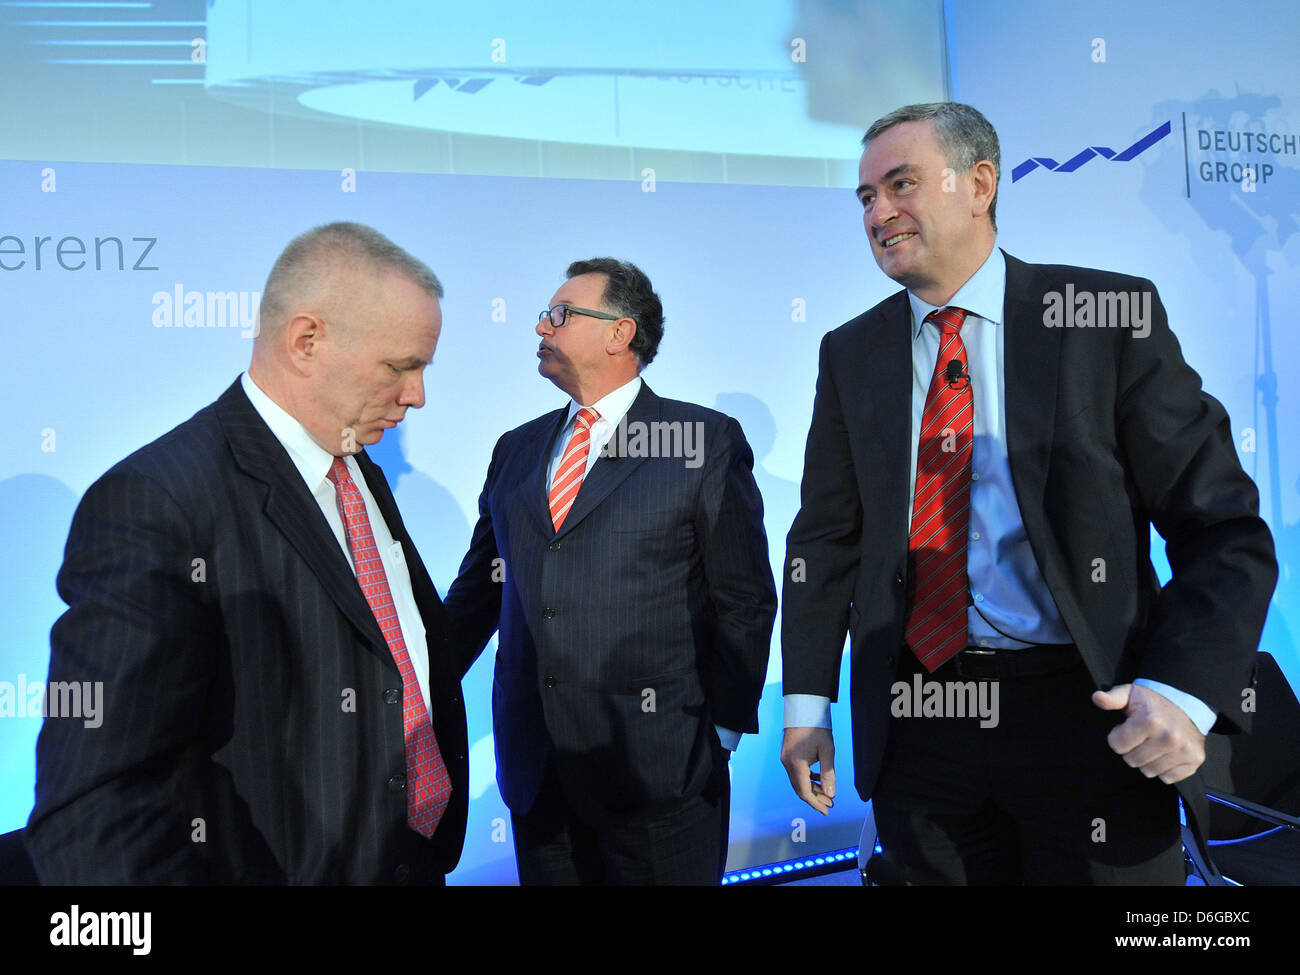 CEO of Deustche Boerse AG Reto Francioni (C) tries to arrange his fellow members of the board Gregor Pottmeyer (R) and Andreas Preuss (L) for a group picture after a press conference on the annual results in Frankfurt Main, Germany, 14 February 2012. Francioni said that 2011 was the second best year in the company's history. Photo: BORIS ROESSLER Stock Photo